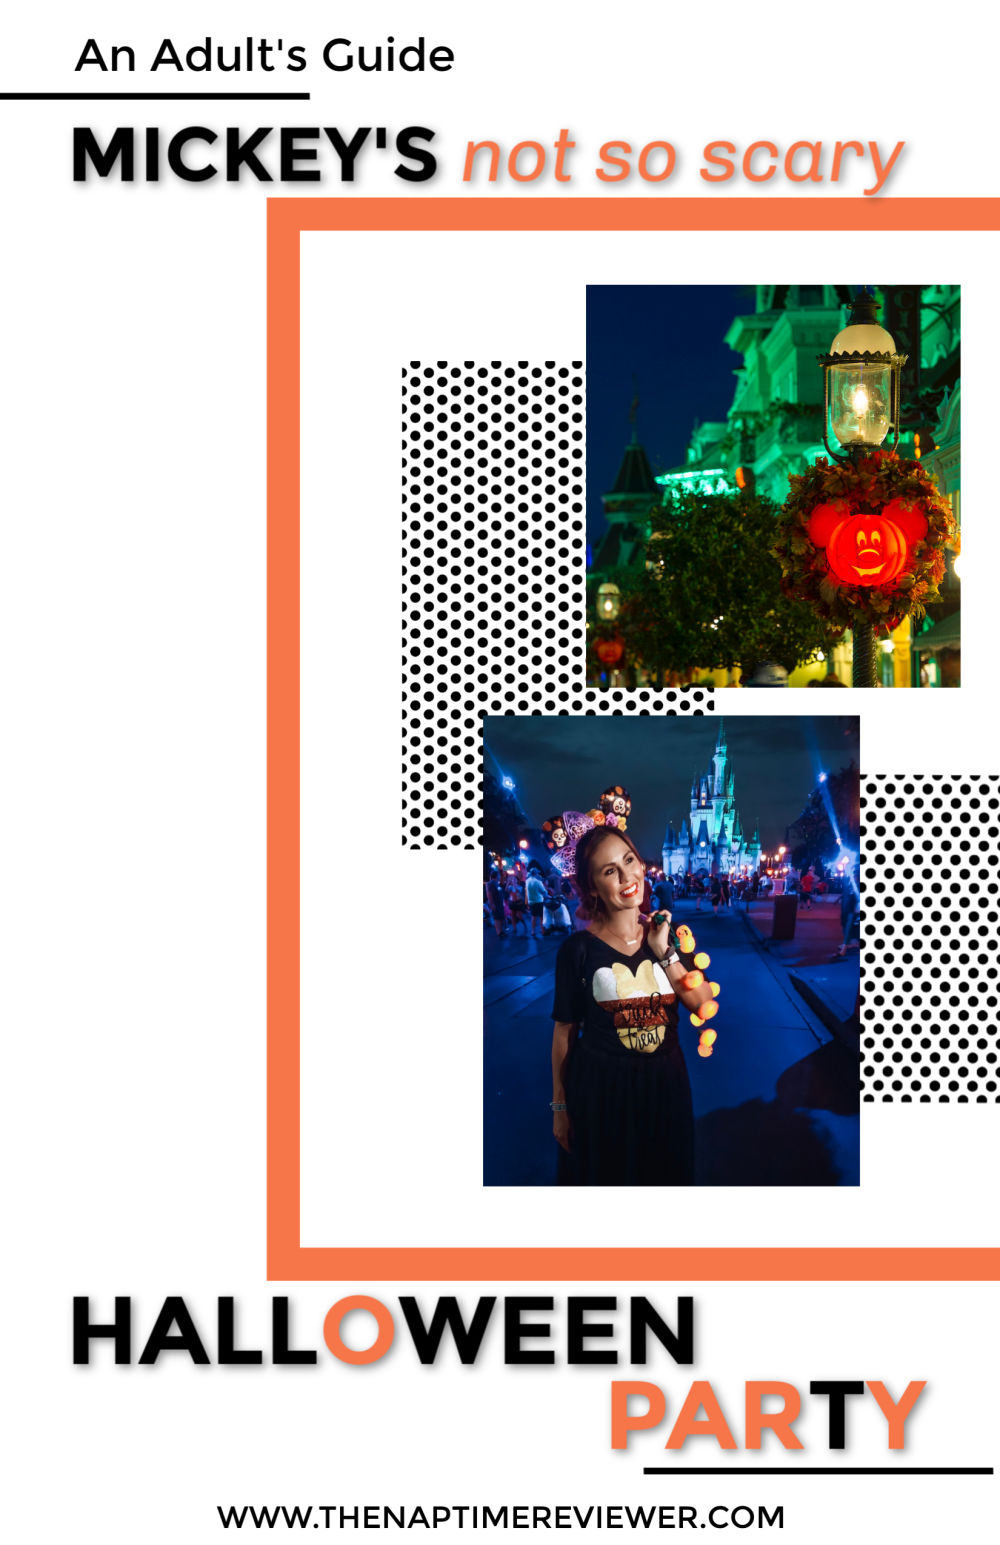 An Adult's Guide to Disney World's Mickey's NSSHP + Costume Ideas